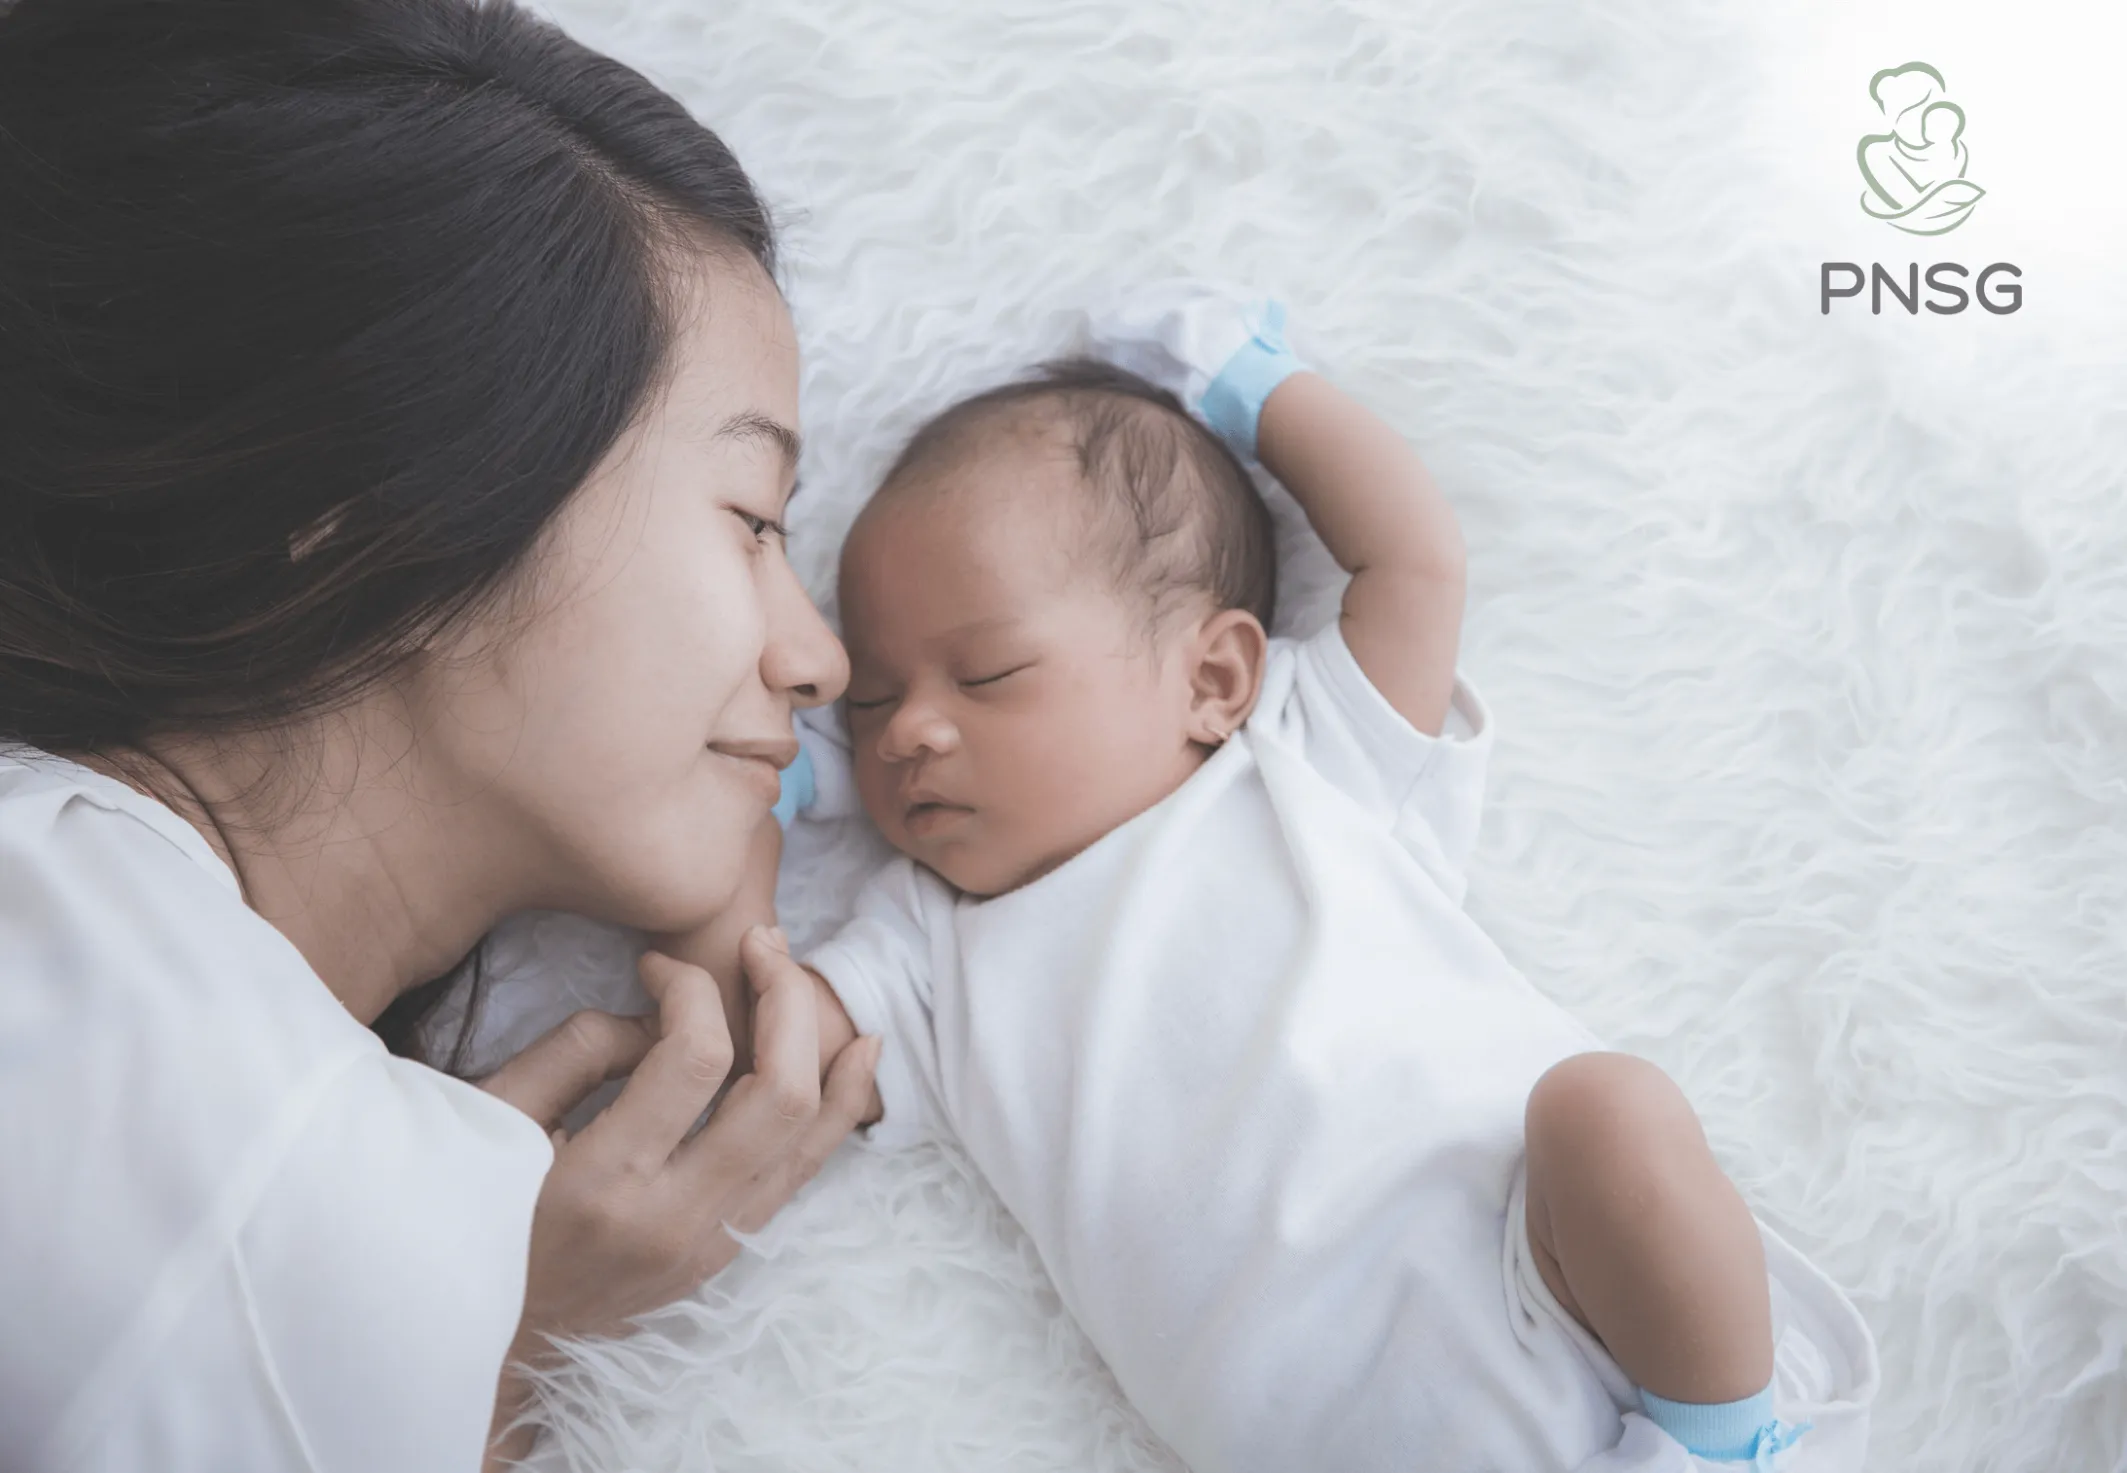 Ways To Promote C-Section Recovery - PNSG Singapore